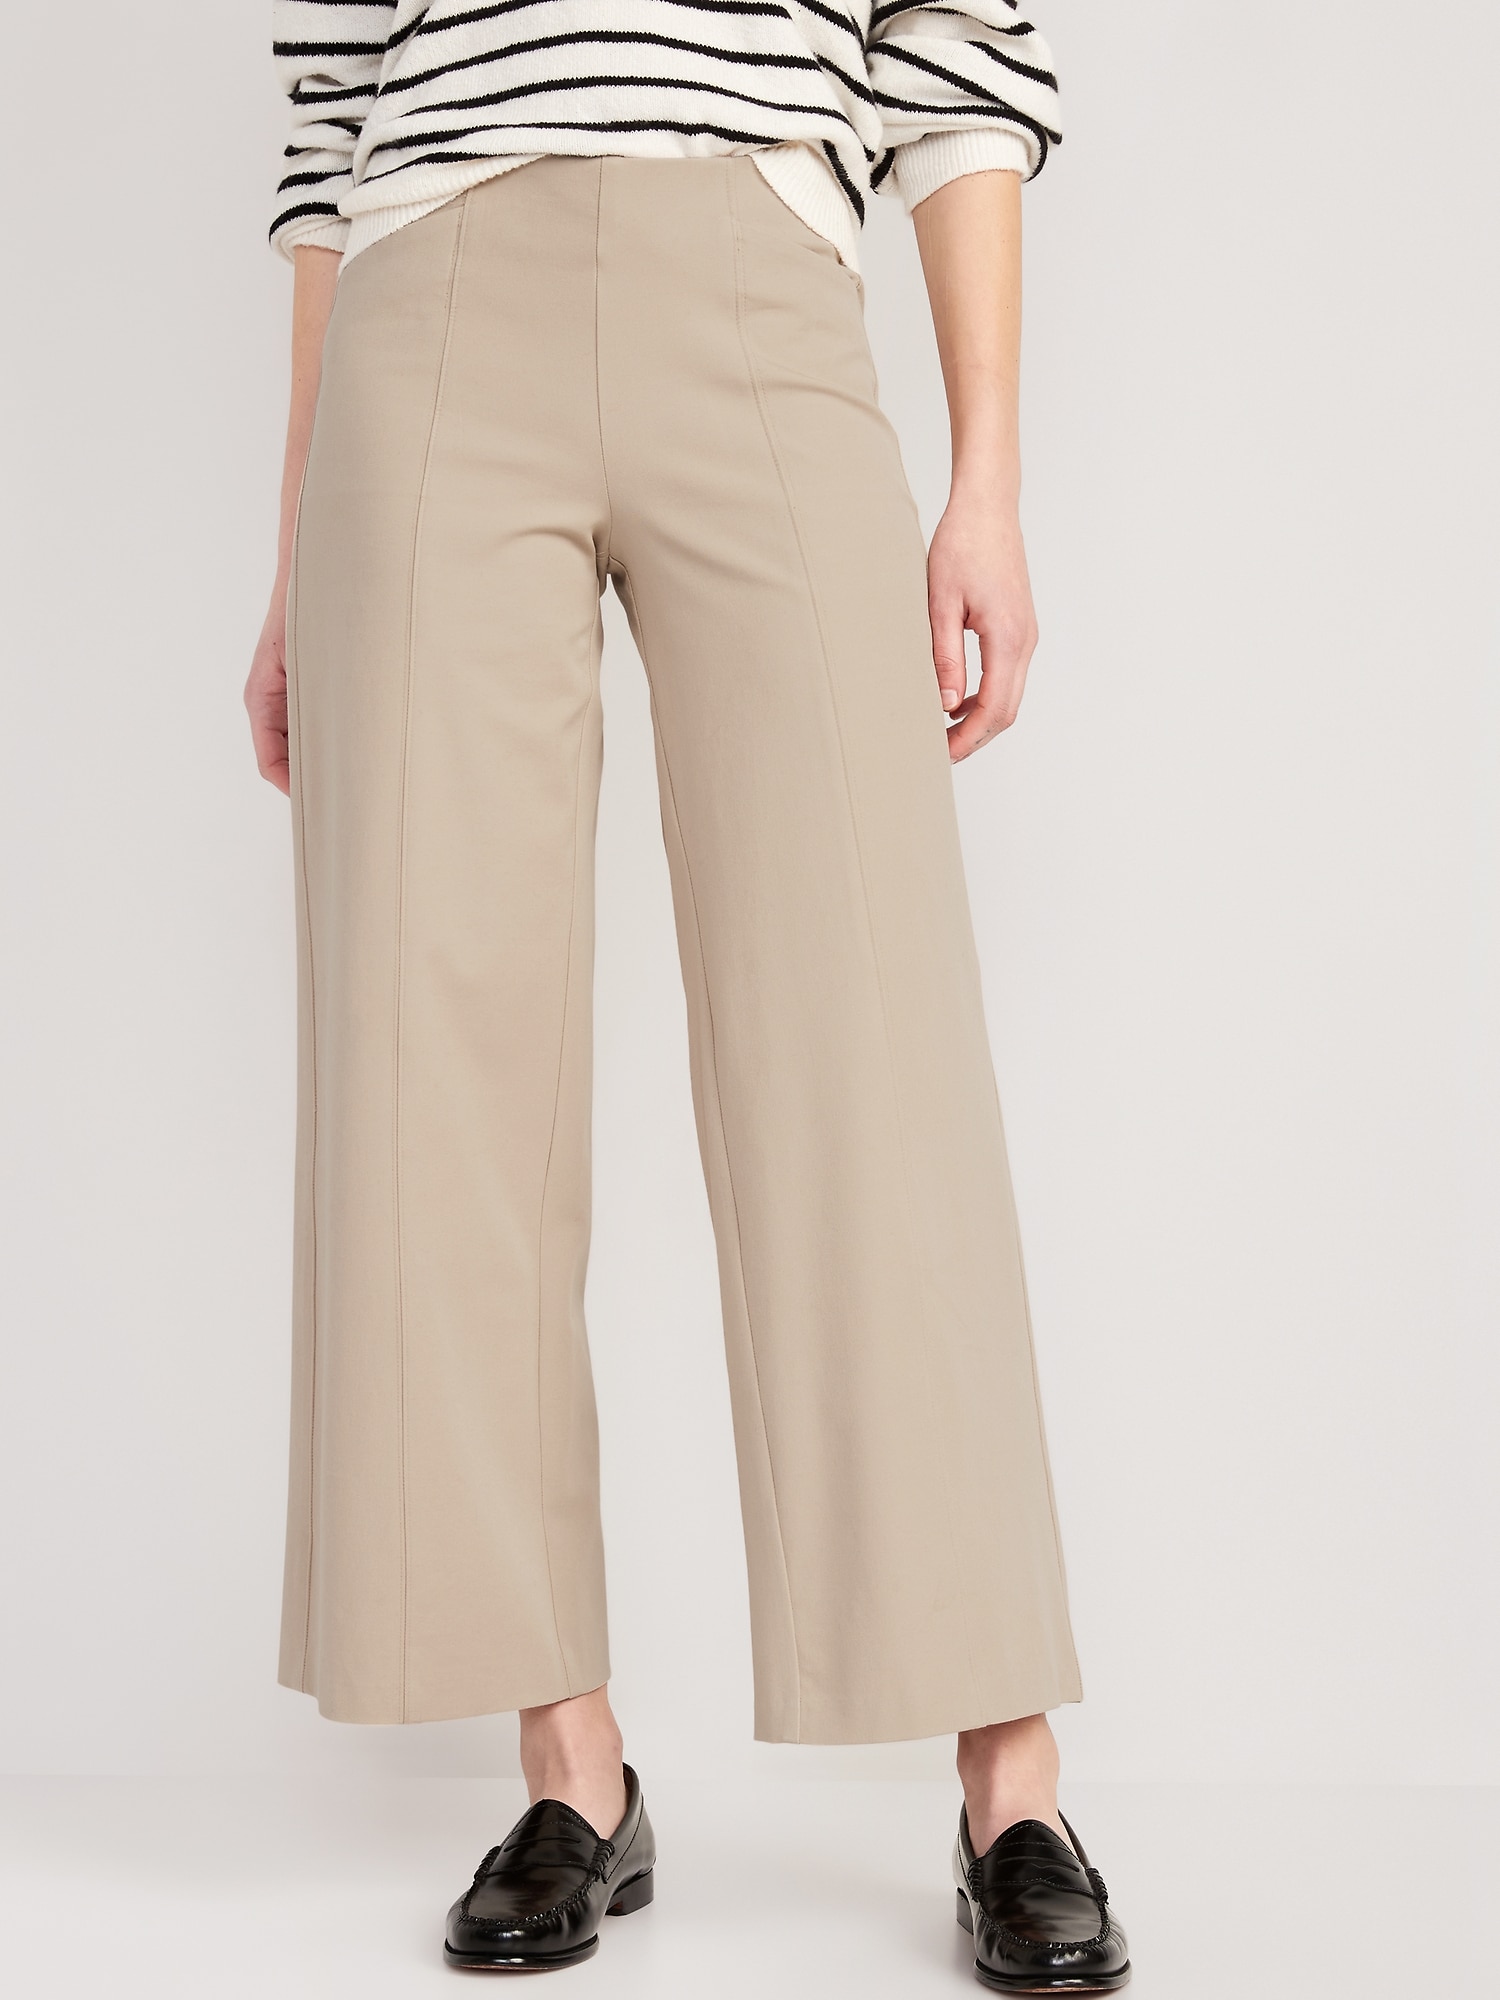 Old Navy High-Waisted Pull-On Pixie Wide-Leg Pants beige. 1